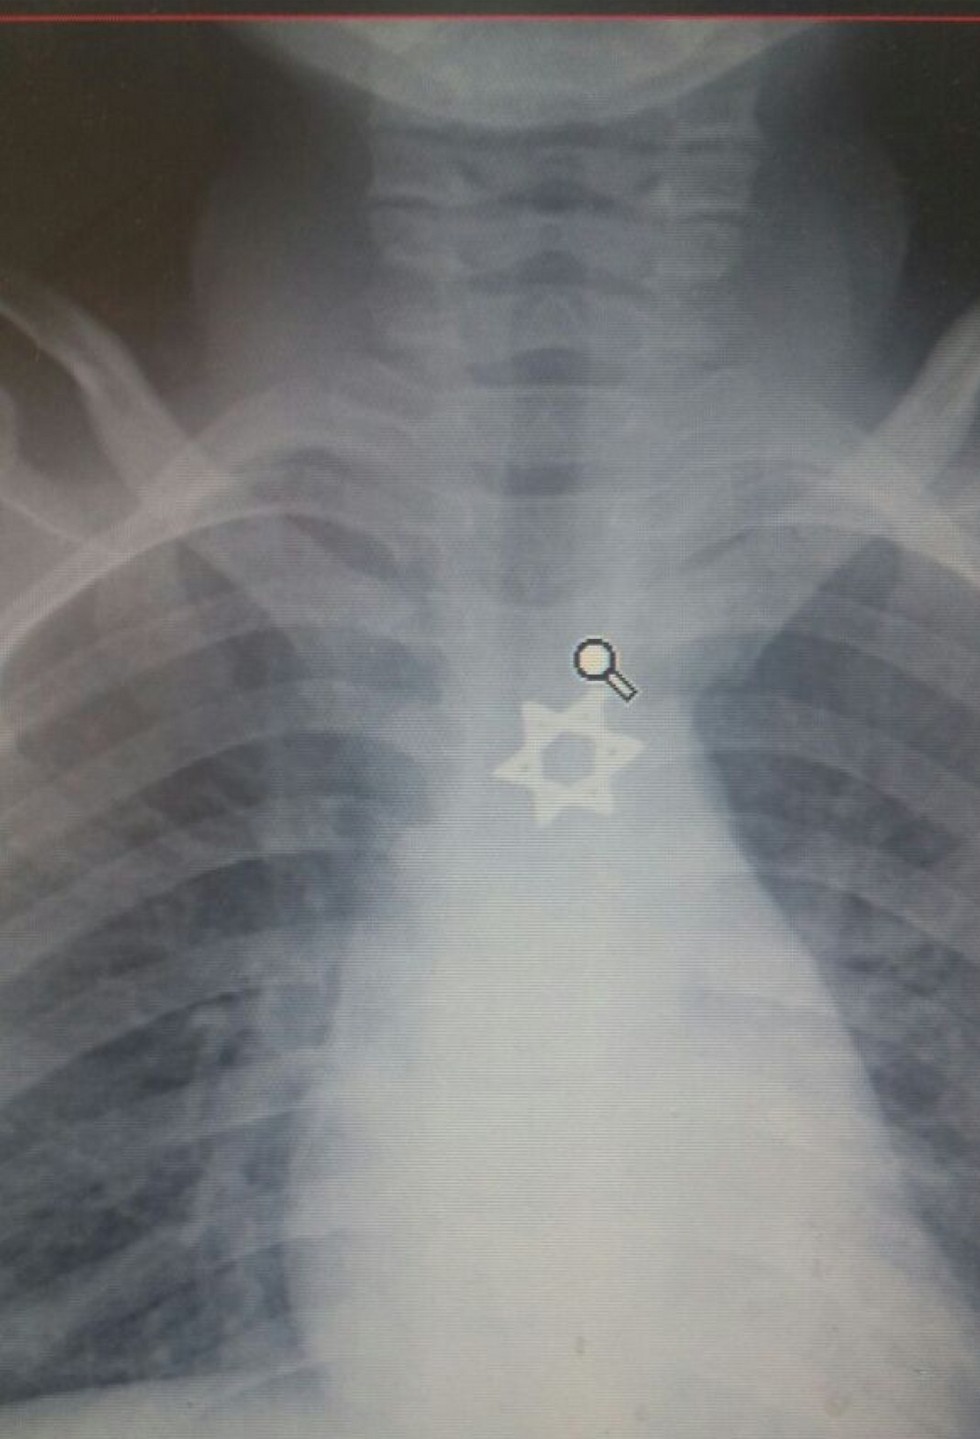 Daud's x-ray, in which the star of David trinket can be seen.